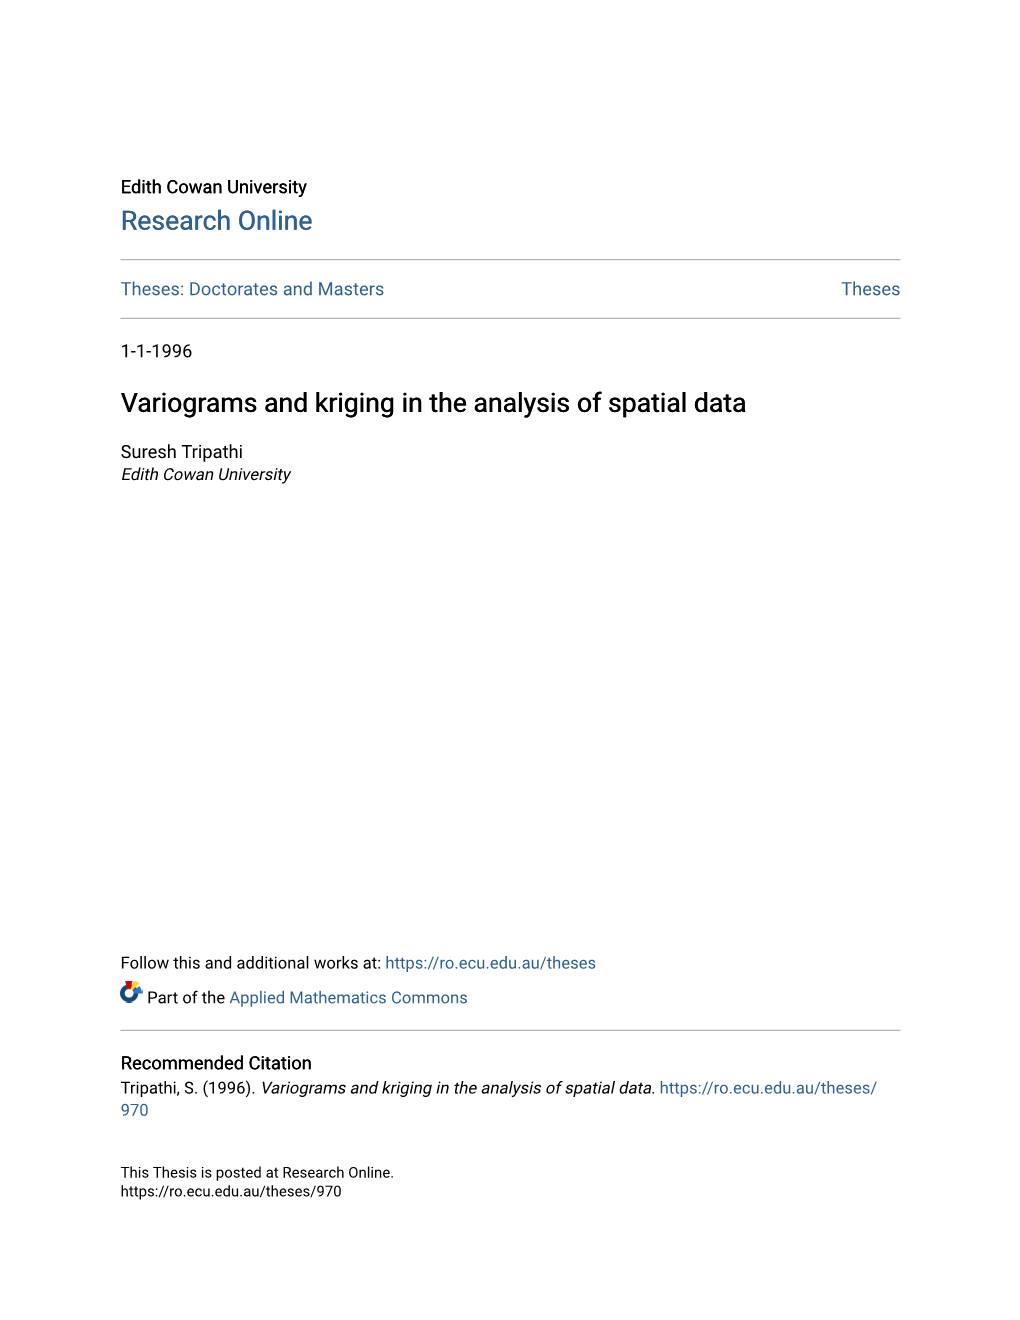 Variograms and Kriging in the Analysis of Spatial Data